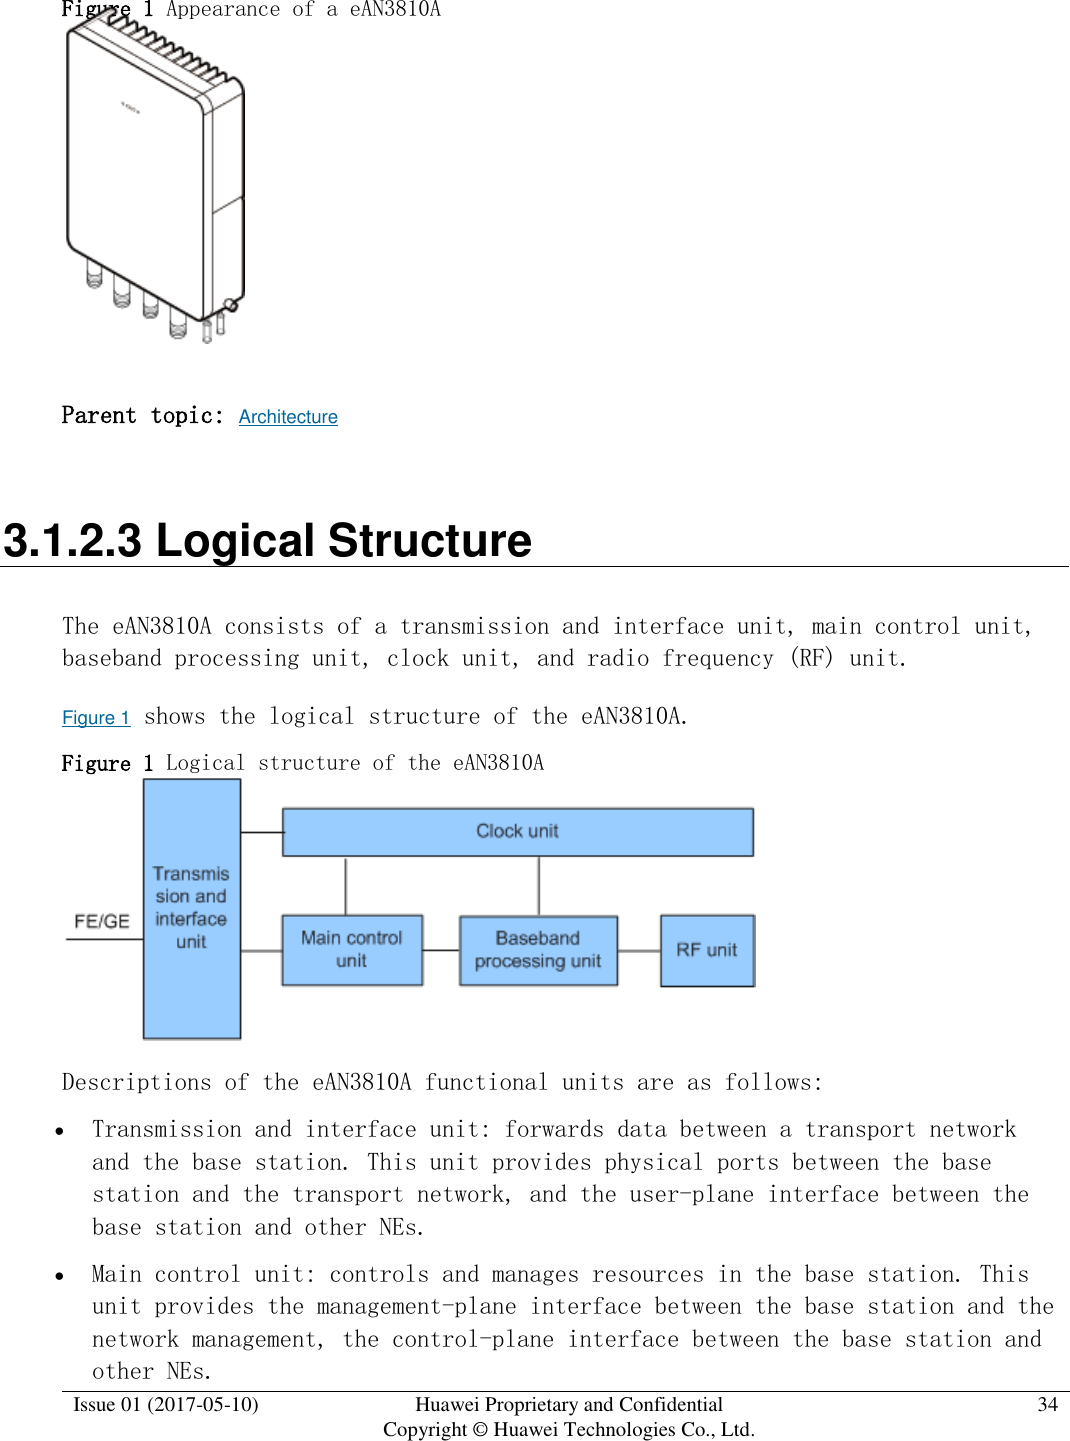  Issue 01 (2017-05-10) Huawei Proprietary and Confidential      Copyright © Huawei Technologies Co., Ltd. 34  Figure 1 Appearance of a eAN3810A   Parent topic: Architecture 3.1.2.3 Logical Structure The eAN3810A consists of a transmission and interface unit, main control unit, baseband processing unit, clock unit, and radio frequency (RF) unit. Figure 1 shows the logical structure of the eAN3810A. Figure 1 Logical structure of the eAN3810A   Descriptions of the eAN3810A functional units are as follows:   Transmission and interface unit: forwards data between a transport network and the base station. This unit provides physical ports between the base station and the transport network, and the user-plane interface between the base station and other NEs.  Main control unit: controls and manages resources in the base station. This unit provides the management-plane interface between the base station and the network management, the control-plane interface between the base station and other NEs. 